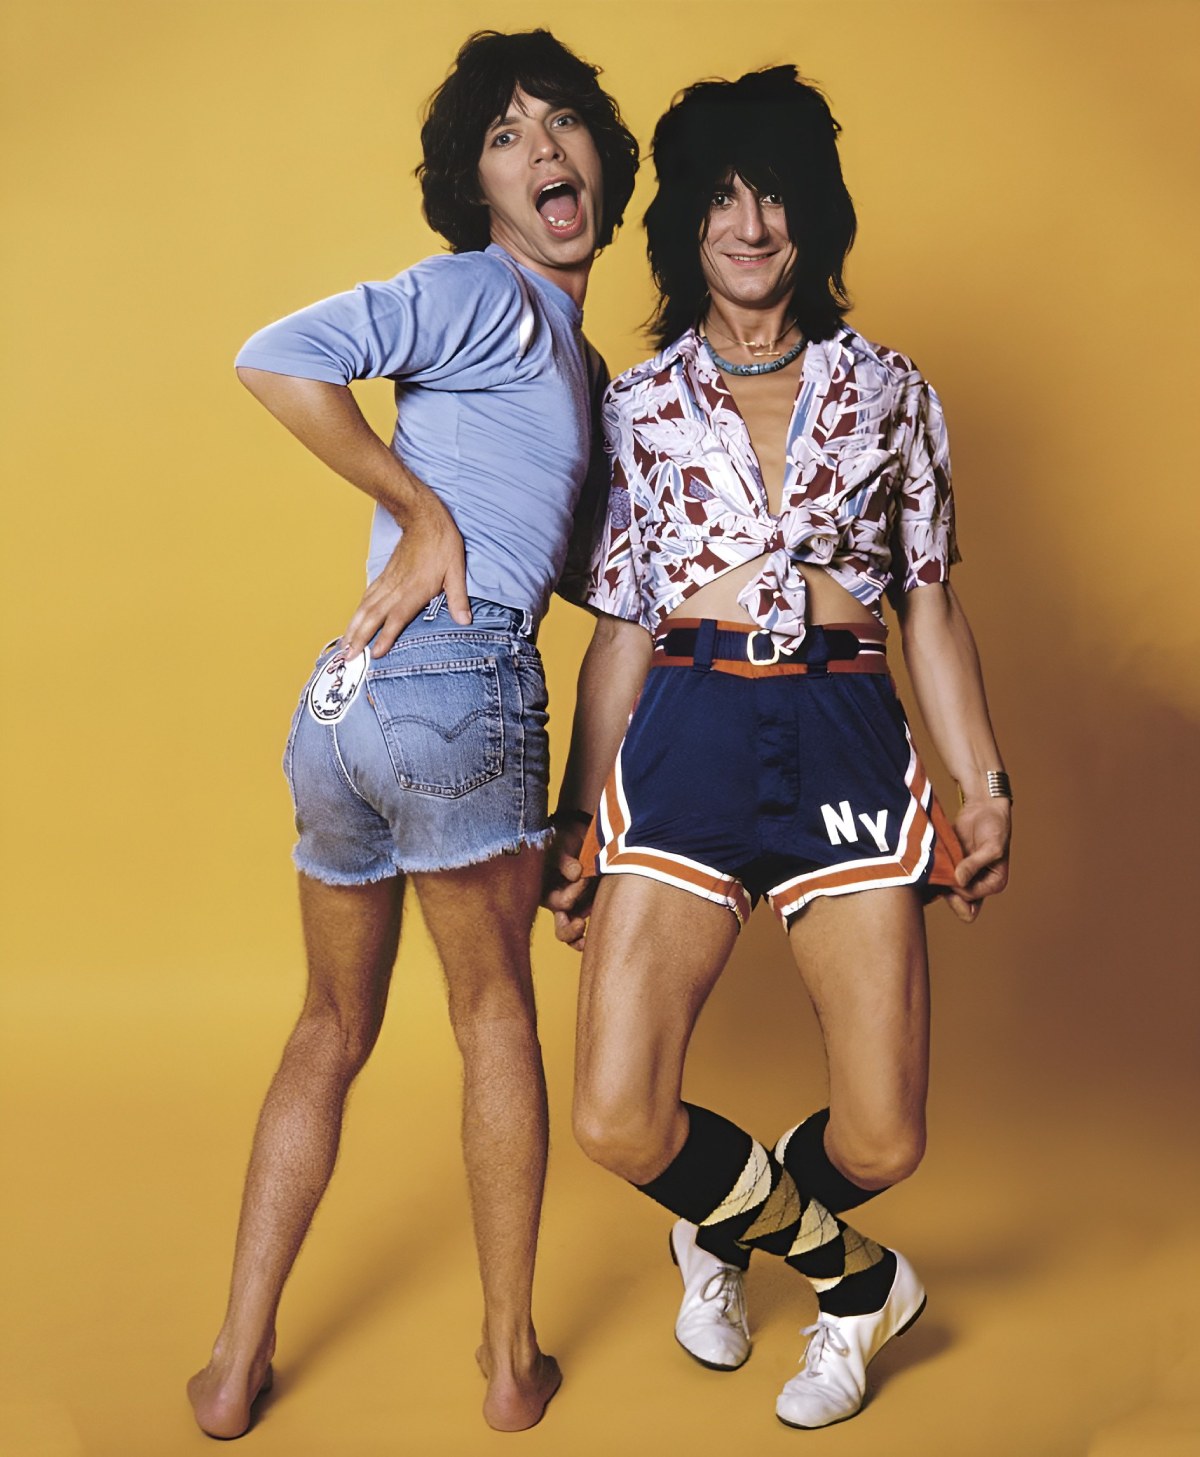 Mick Jagger and Ronnie Wood